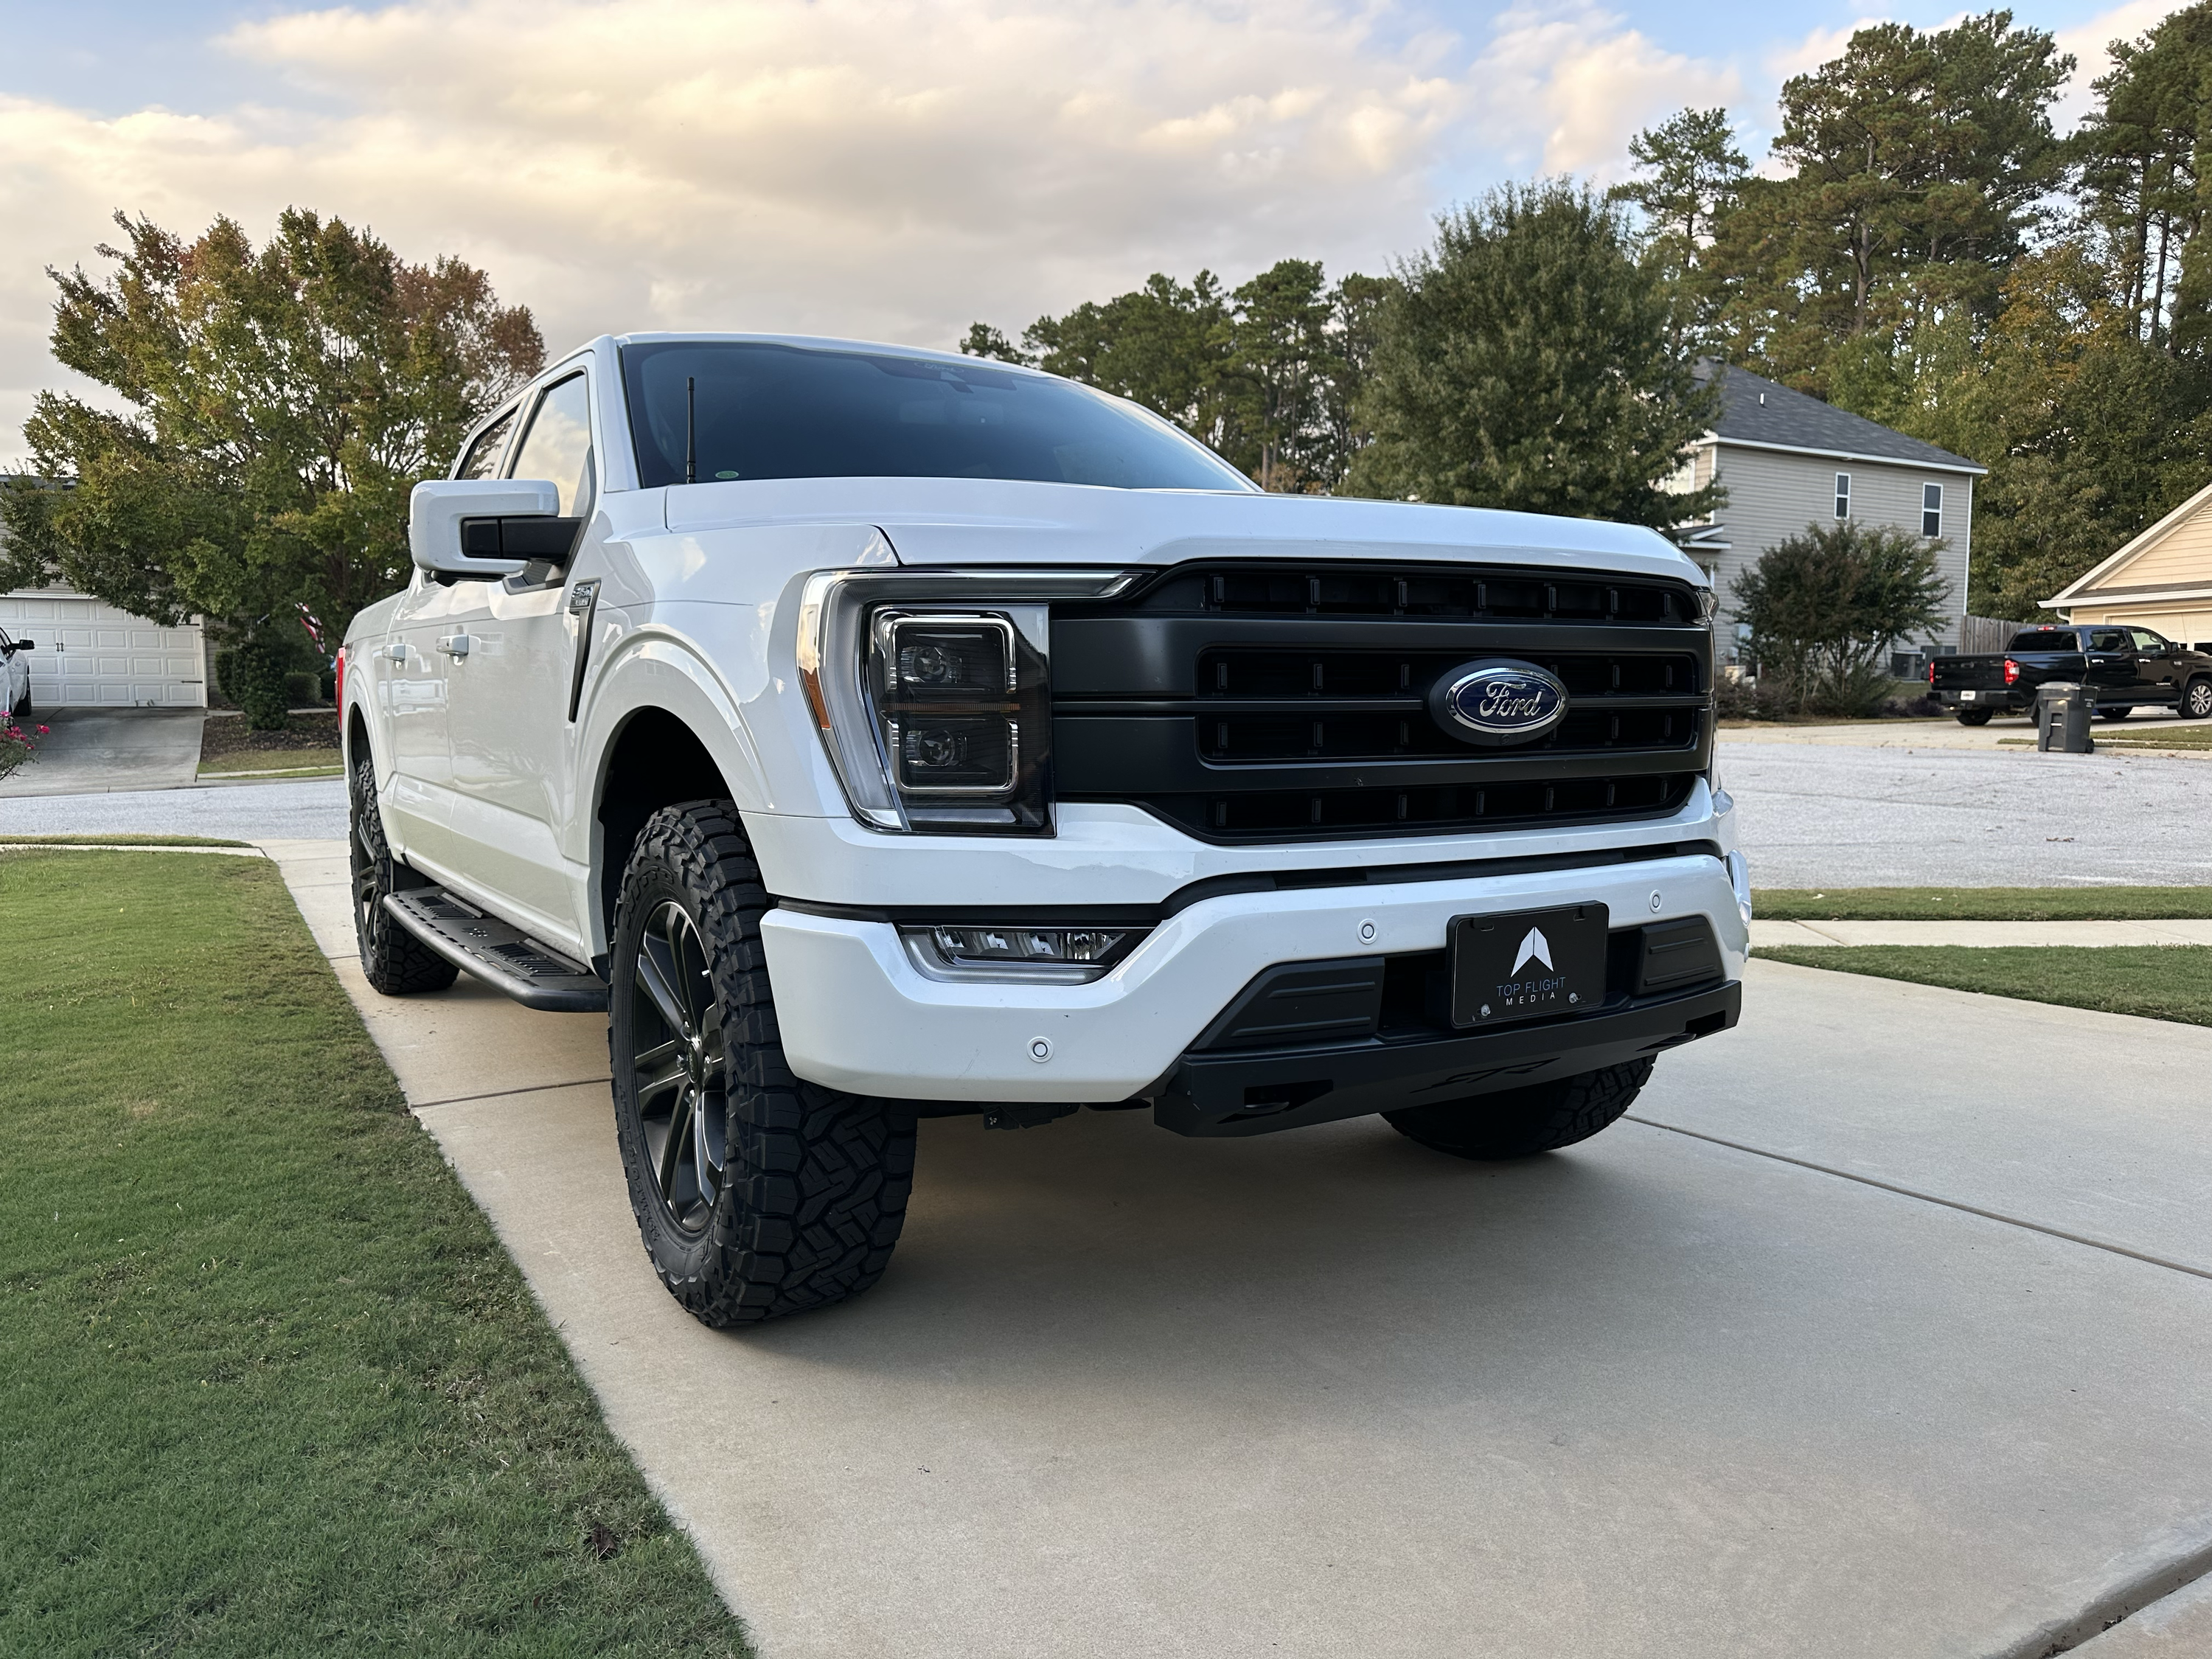 Ford F-150 Build Updates tempImage7mAze8